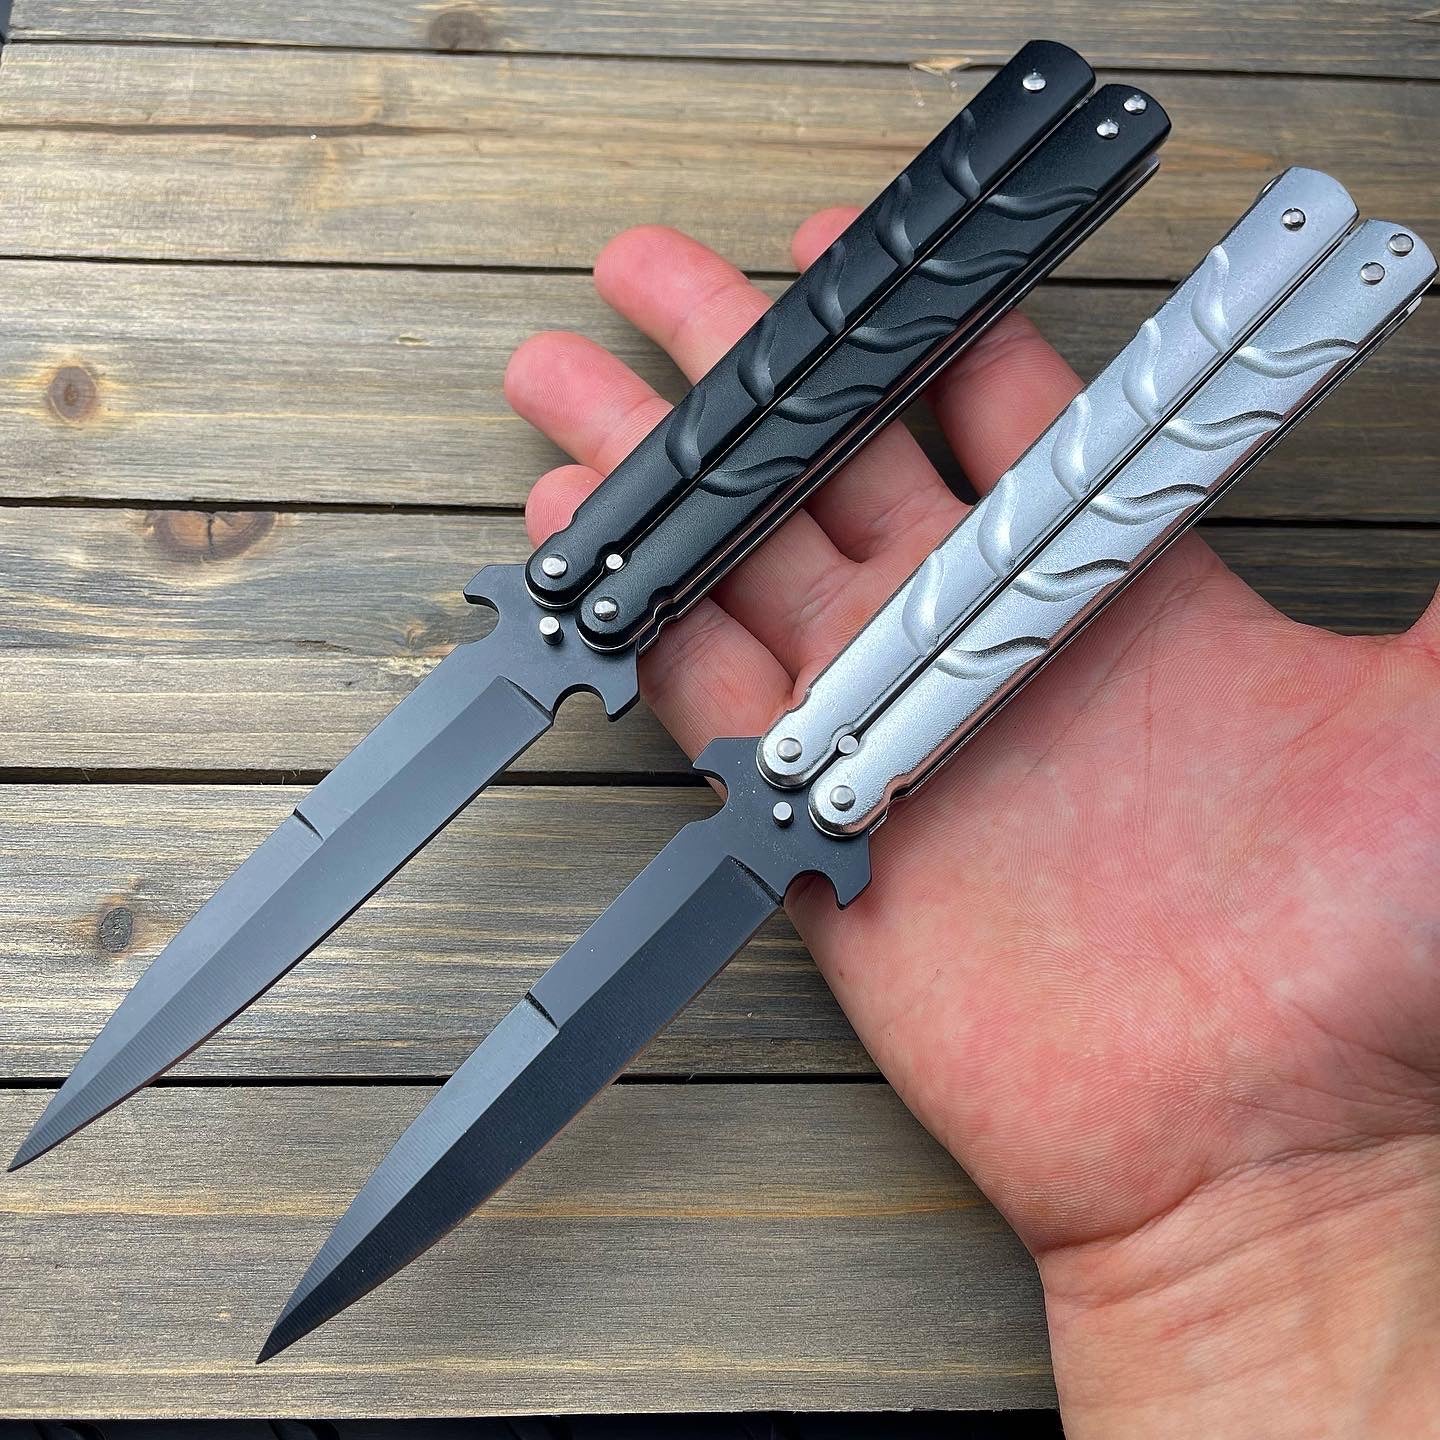 The HELIX Butterfly Knives